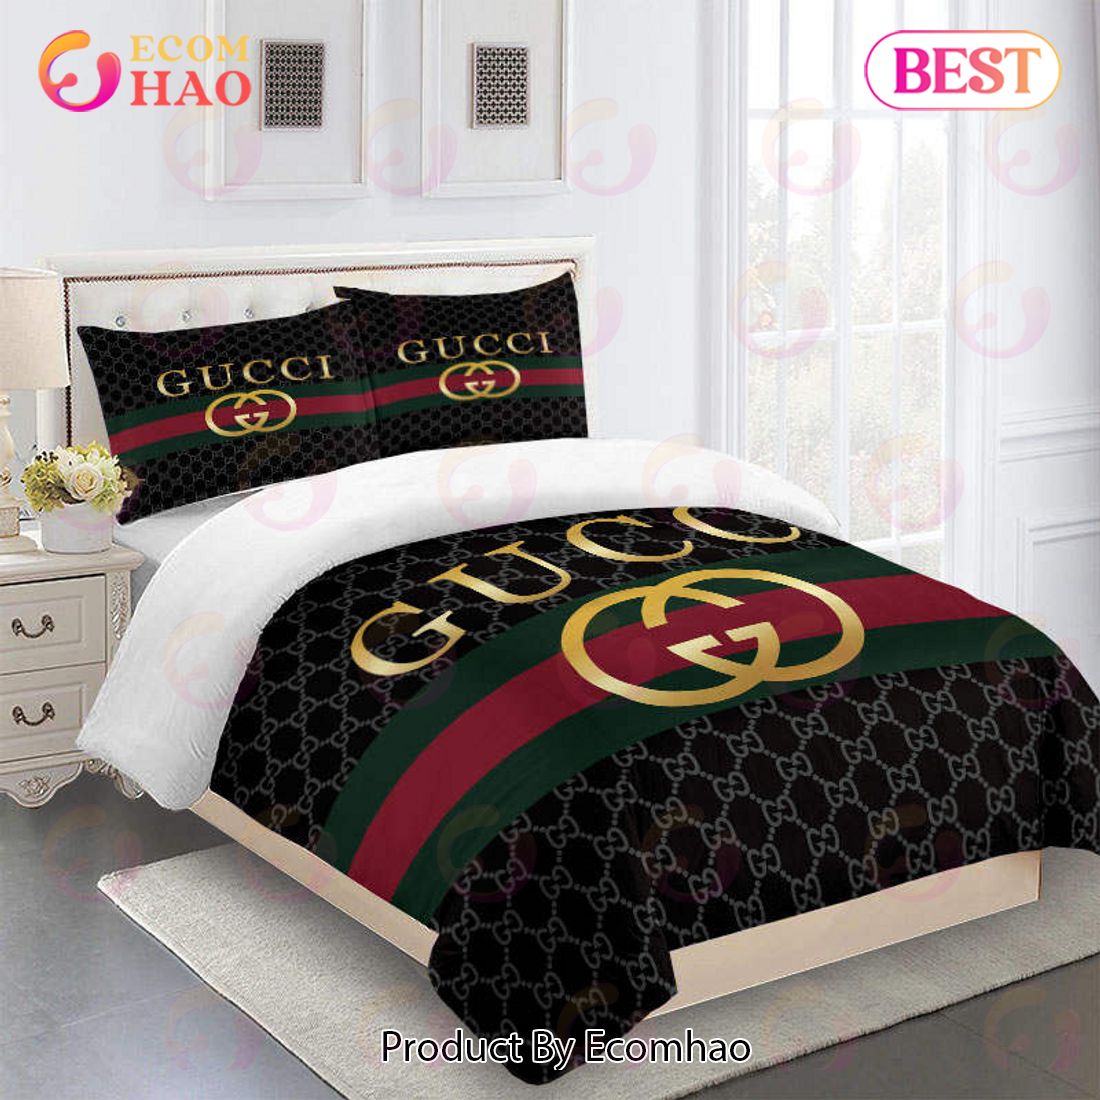 Gucci Bedding Set Black Red Gold Luxury Duvet Cover Bedding Sets - Ecomhao  Store